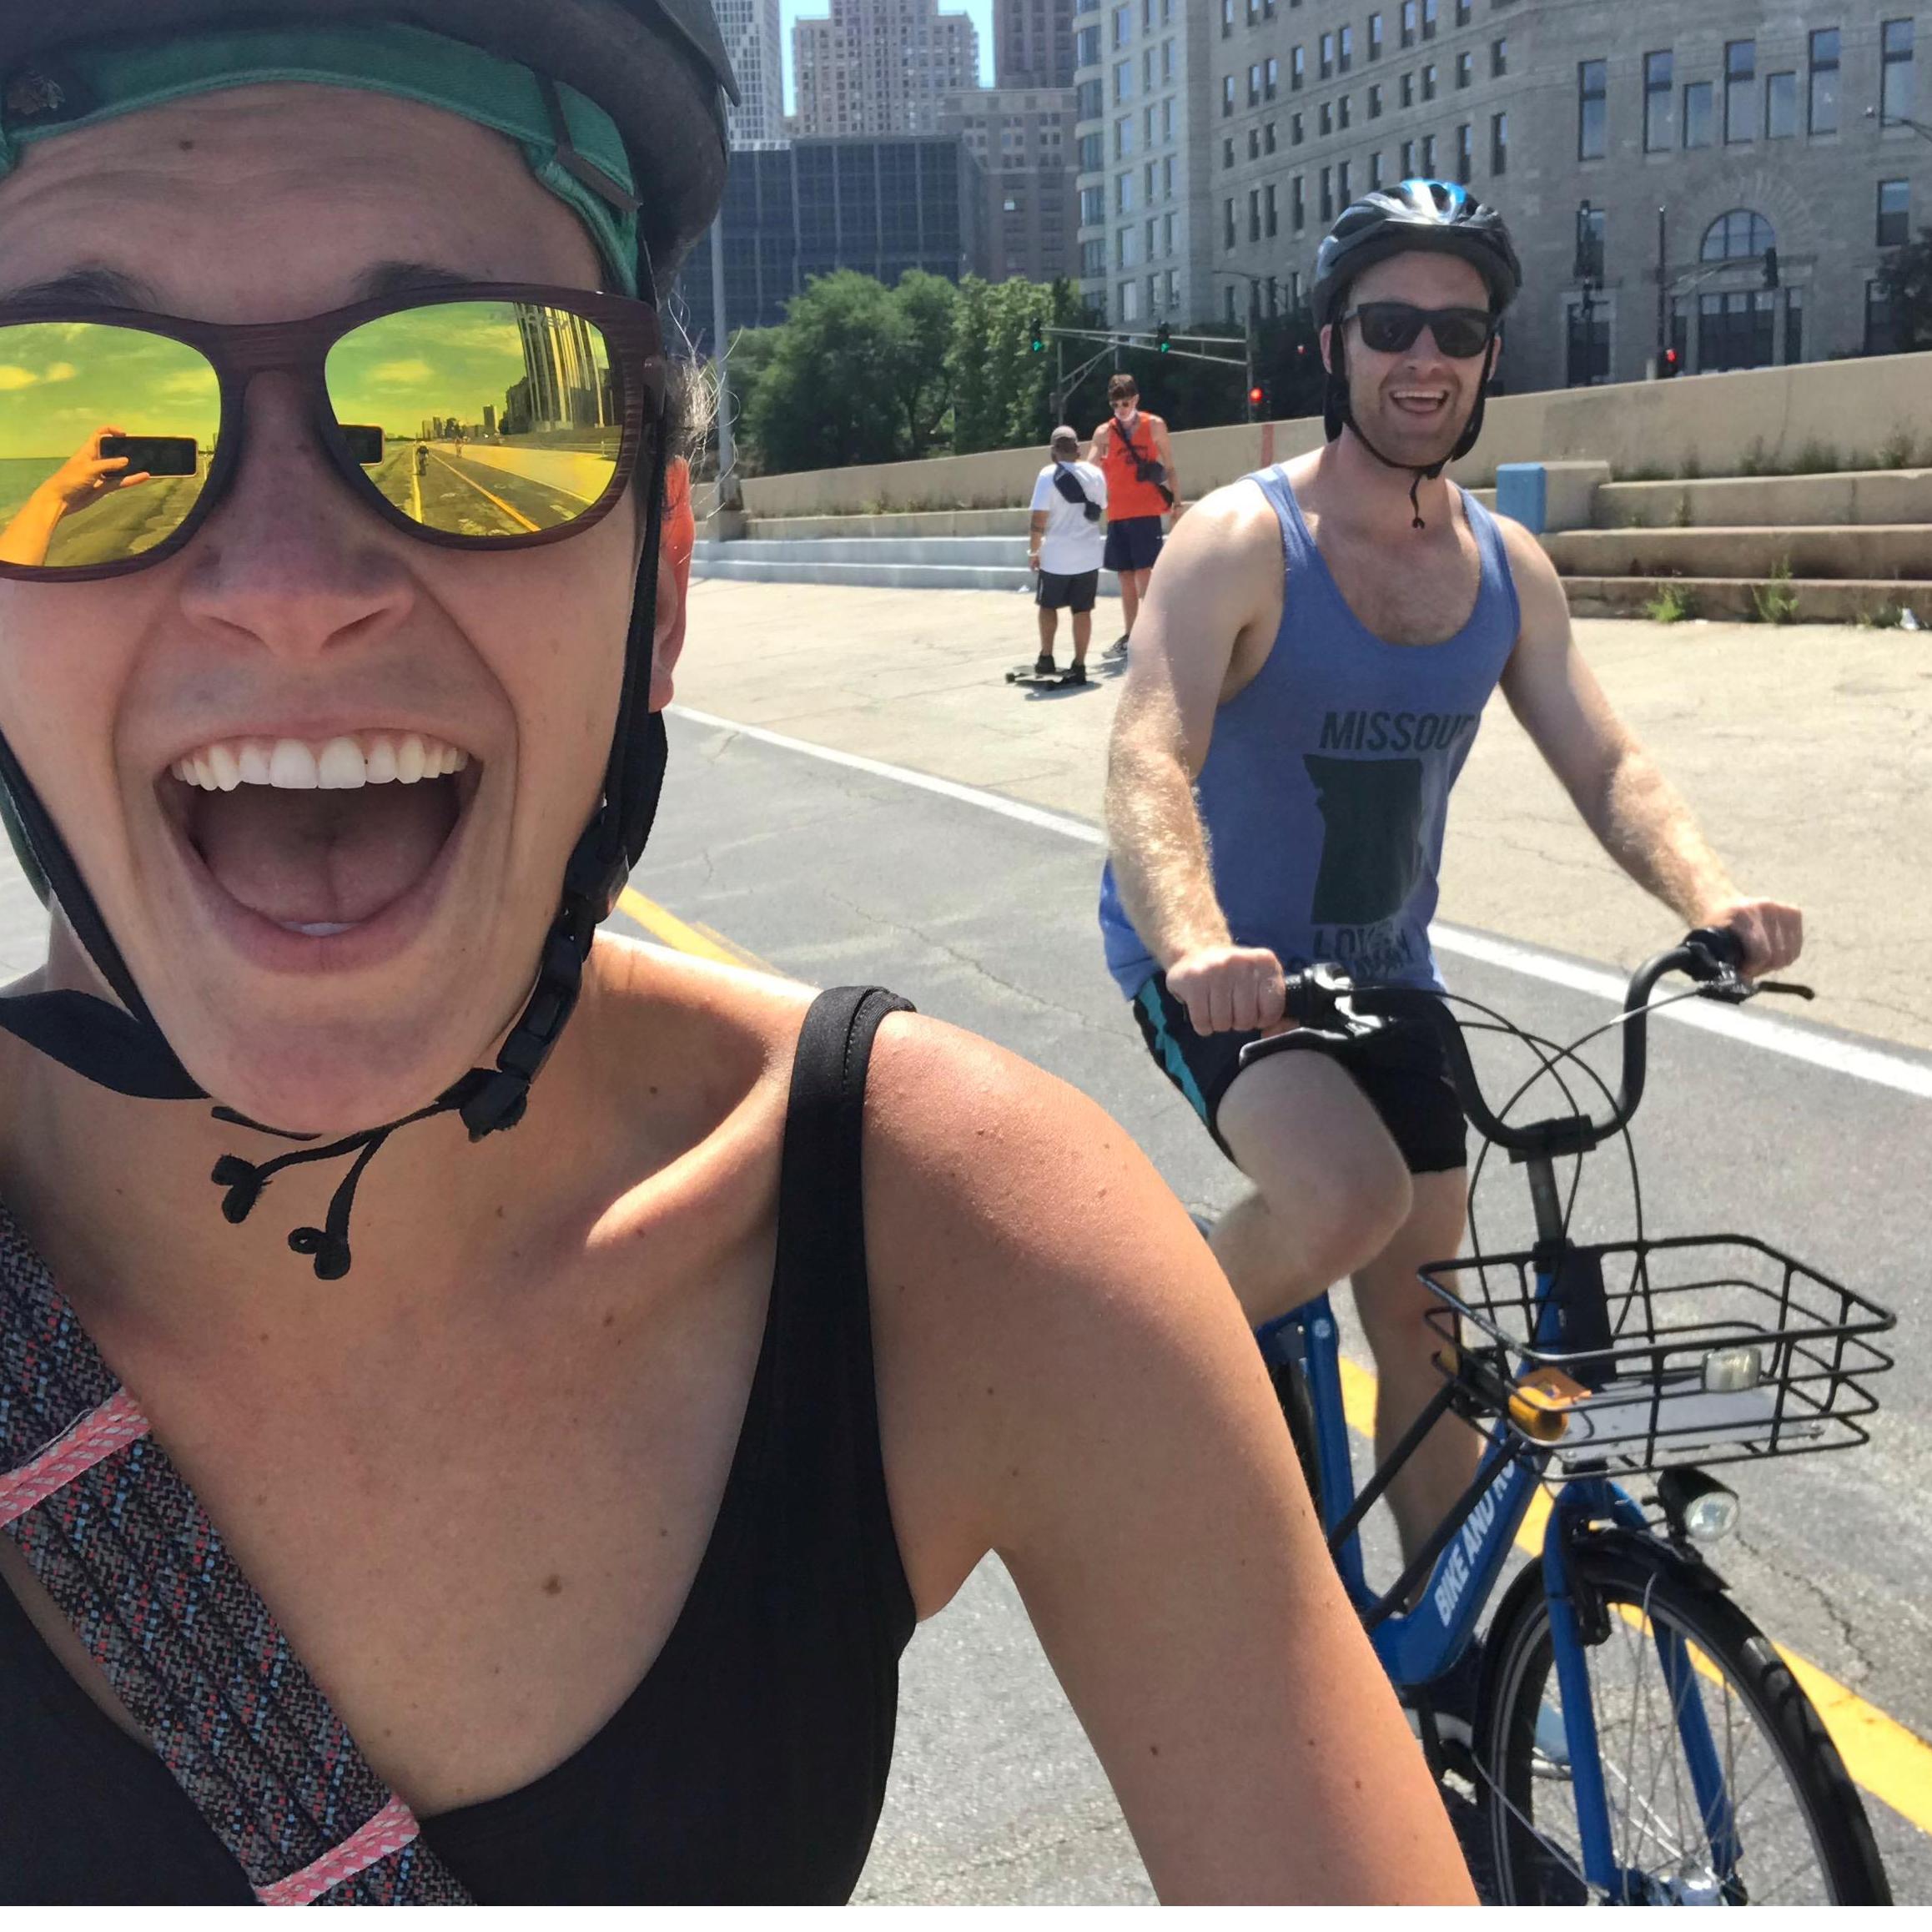 We rented bikes in Chicago!